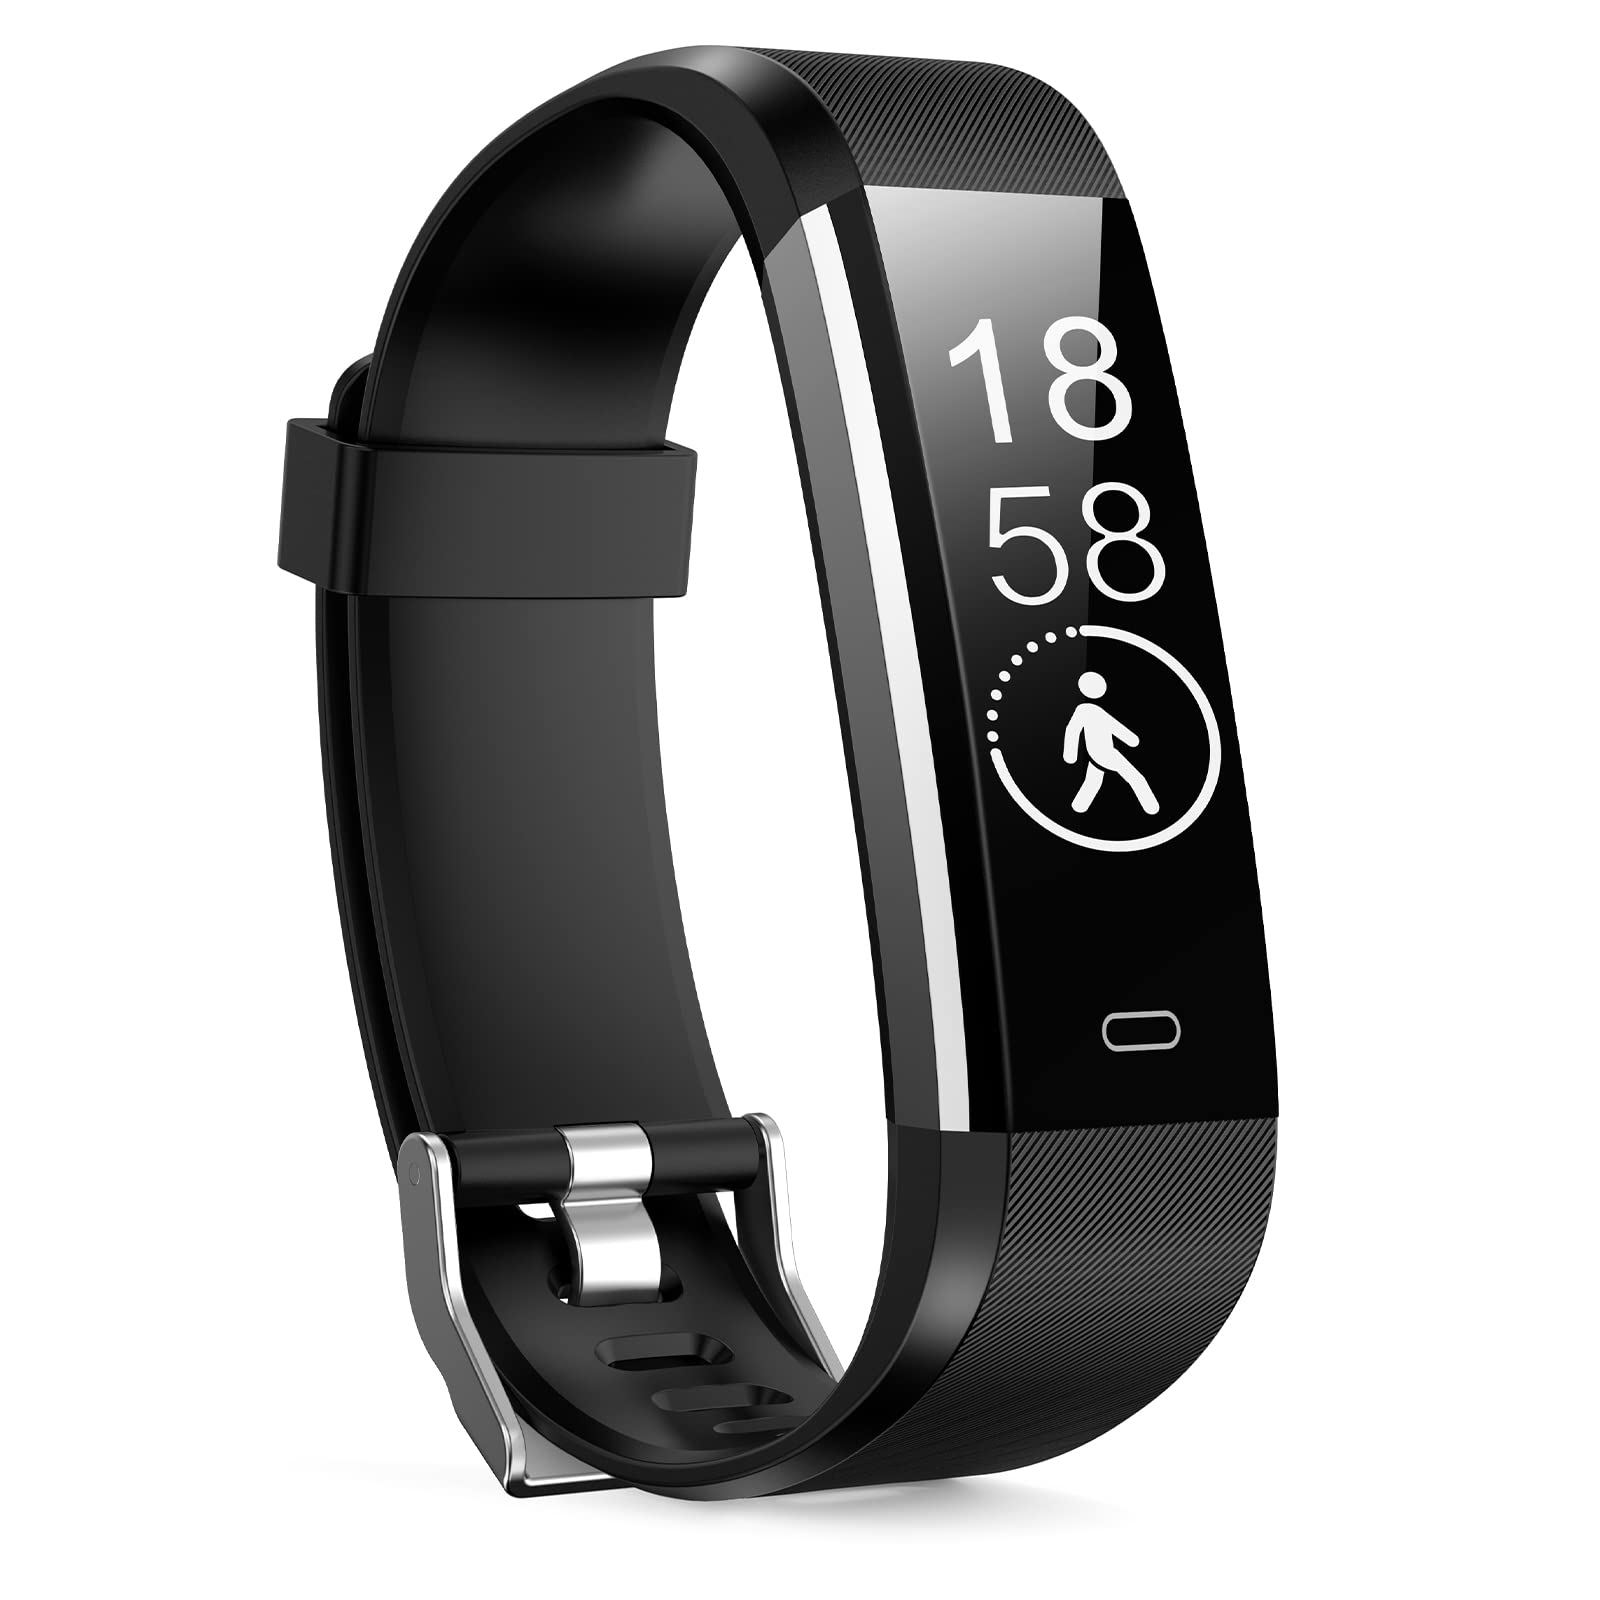 Xiaomi M5 Smart Band: Waterproof Sport Watch With Blood Pressure & Smart  Heart Rate Wristband For Android & IOS Fitness & Health Bracelet For Men  And Women From Trglobal, $3.47 | DHgate.Com